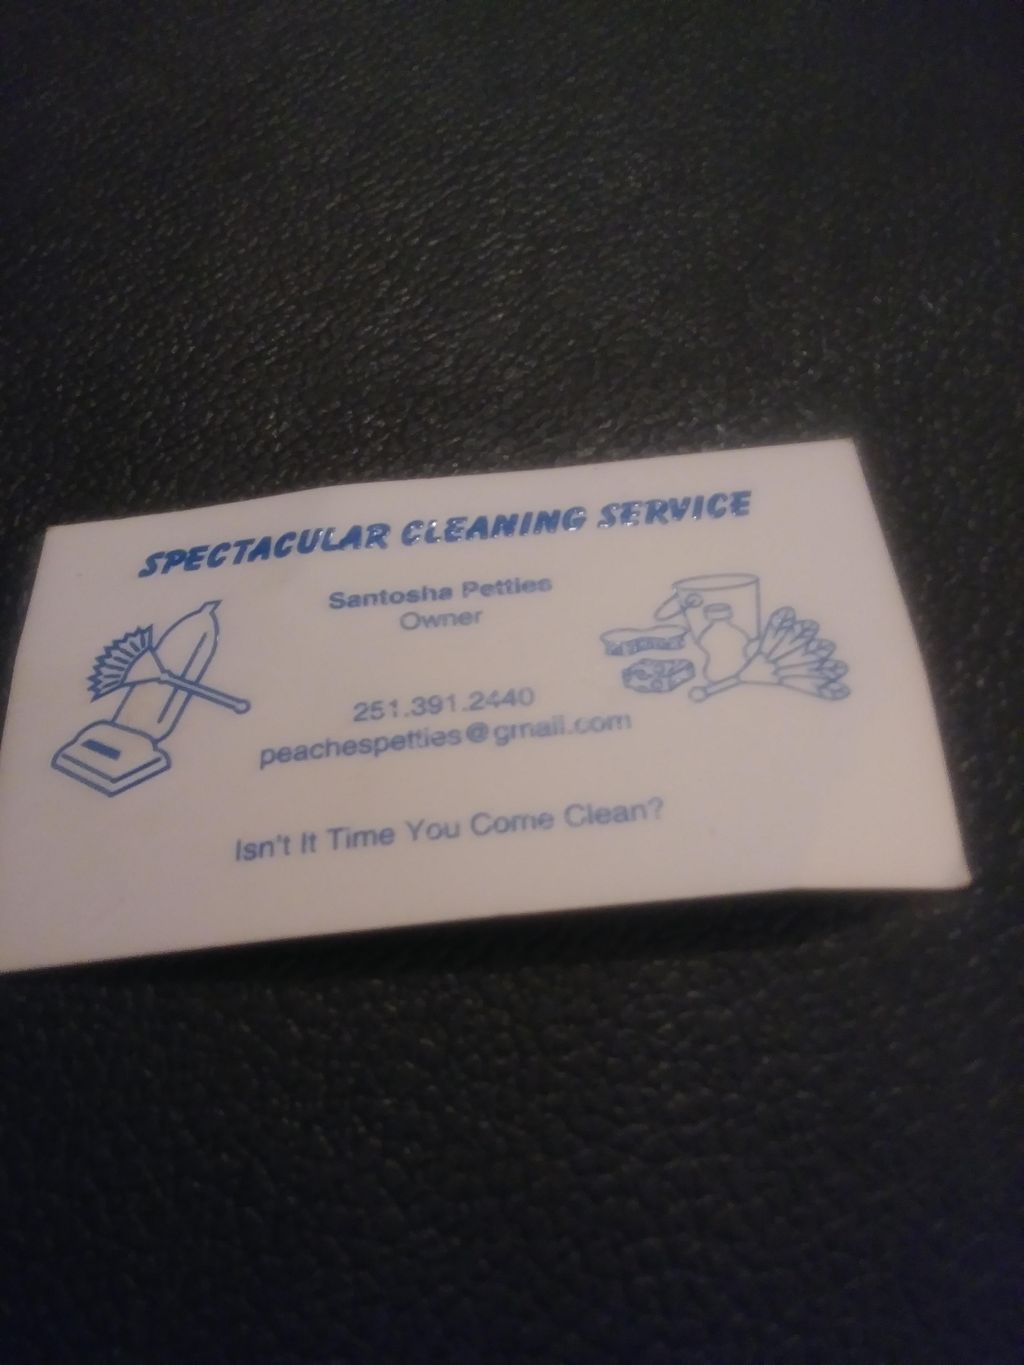 Spectacular Cleaning Service